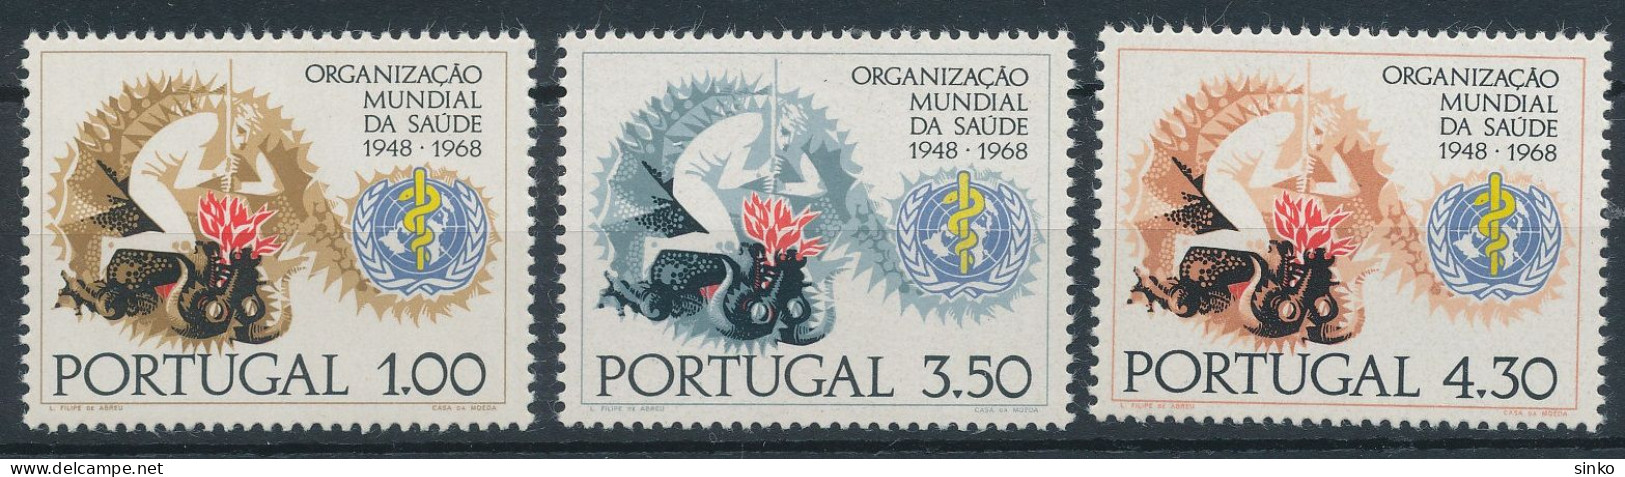 1968. Portugal - WHO - WHO